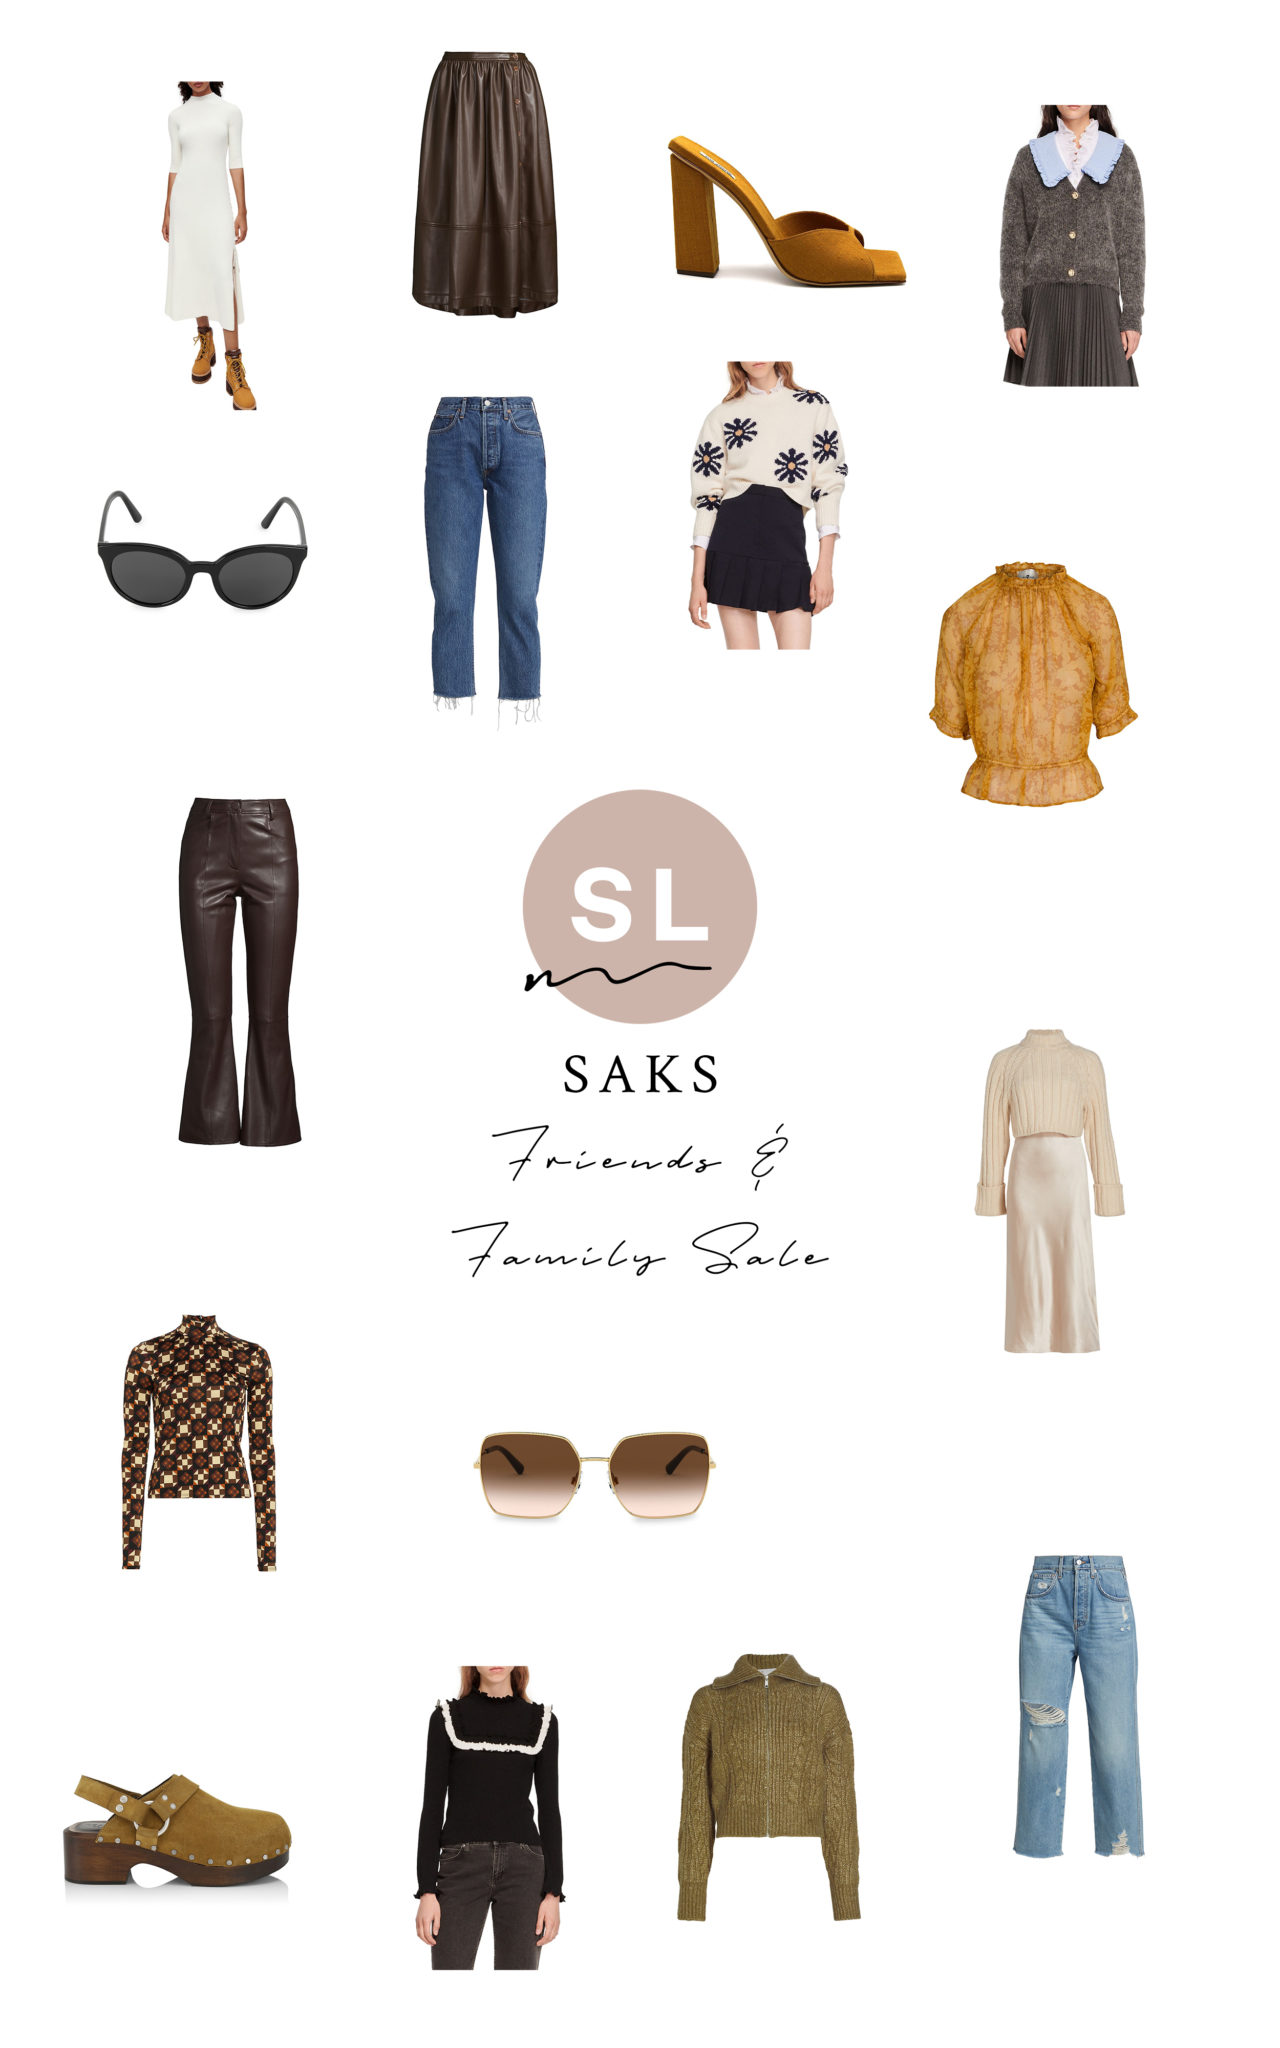 collage of items from Saks Friends & Family Sale